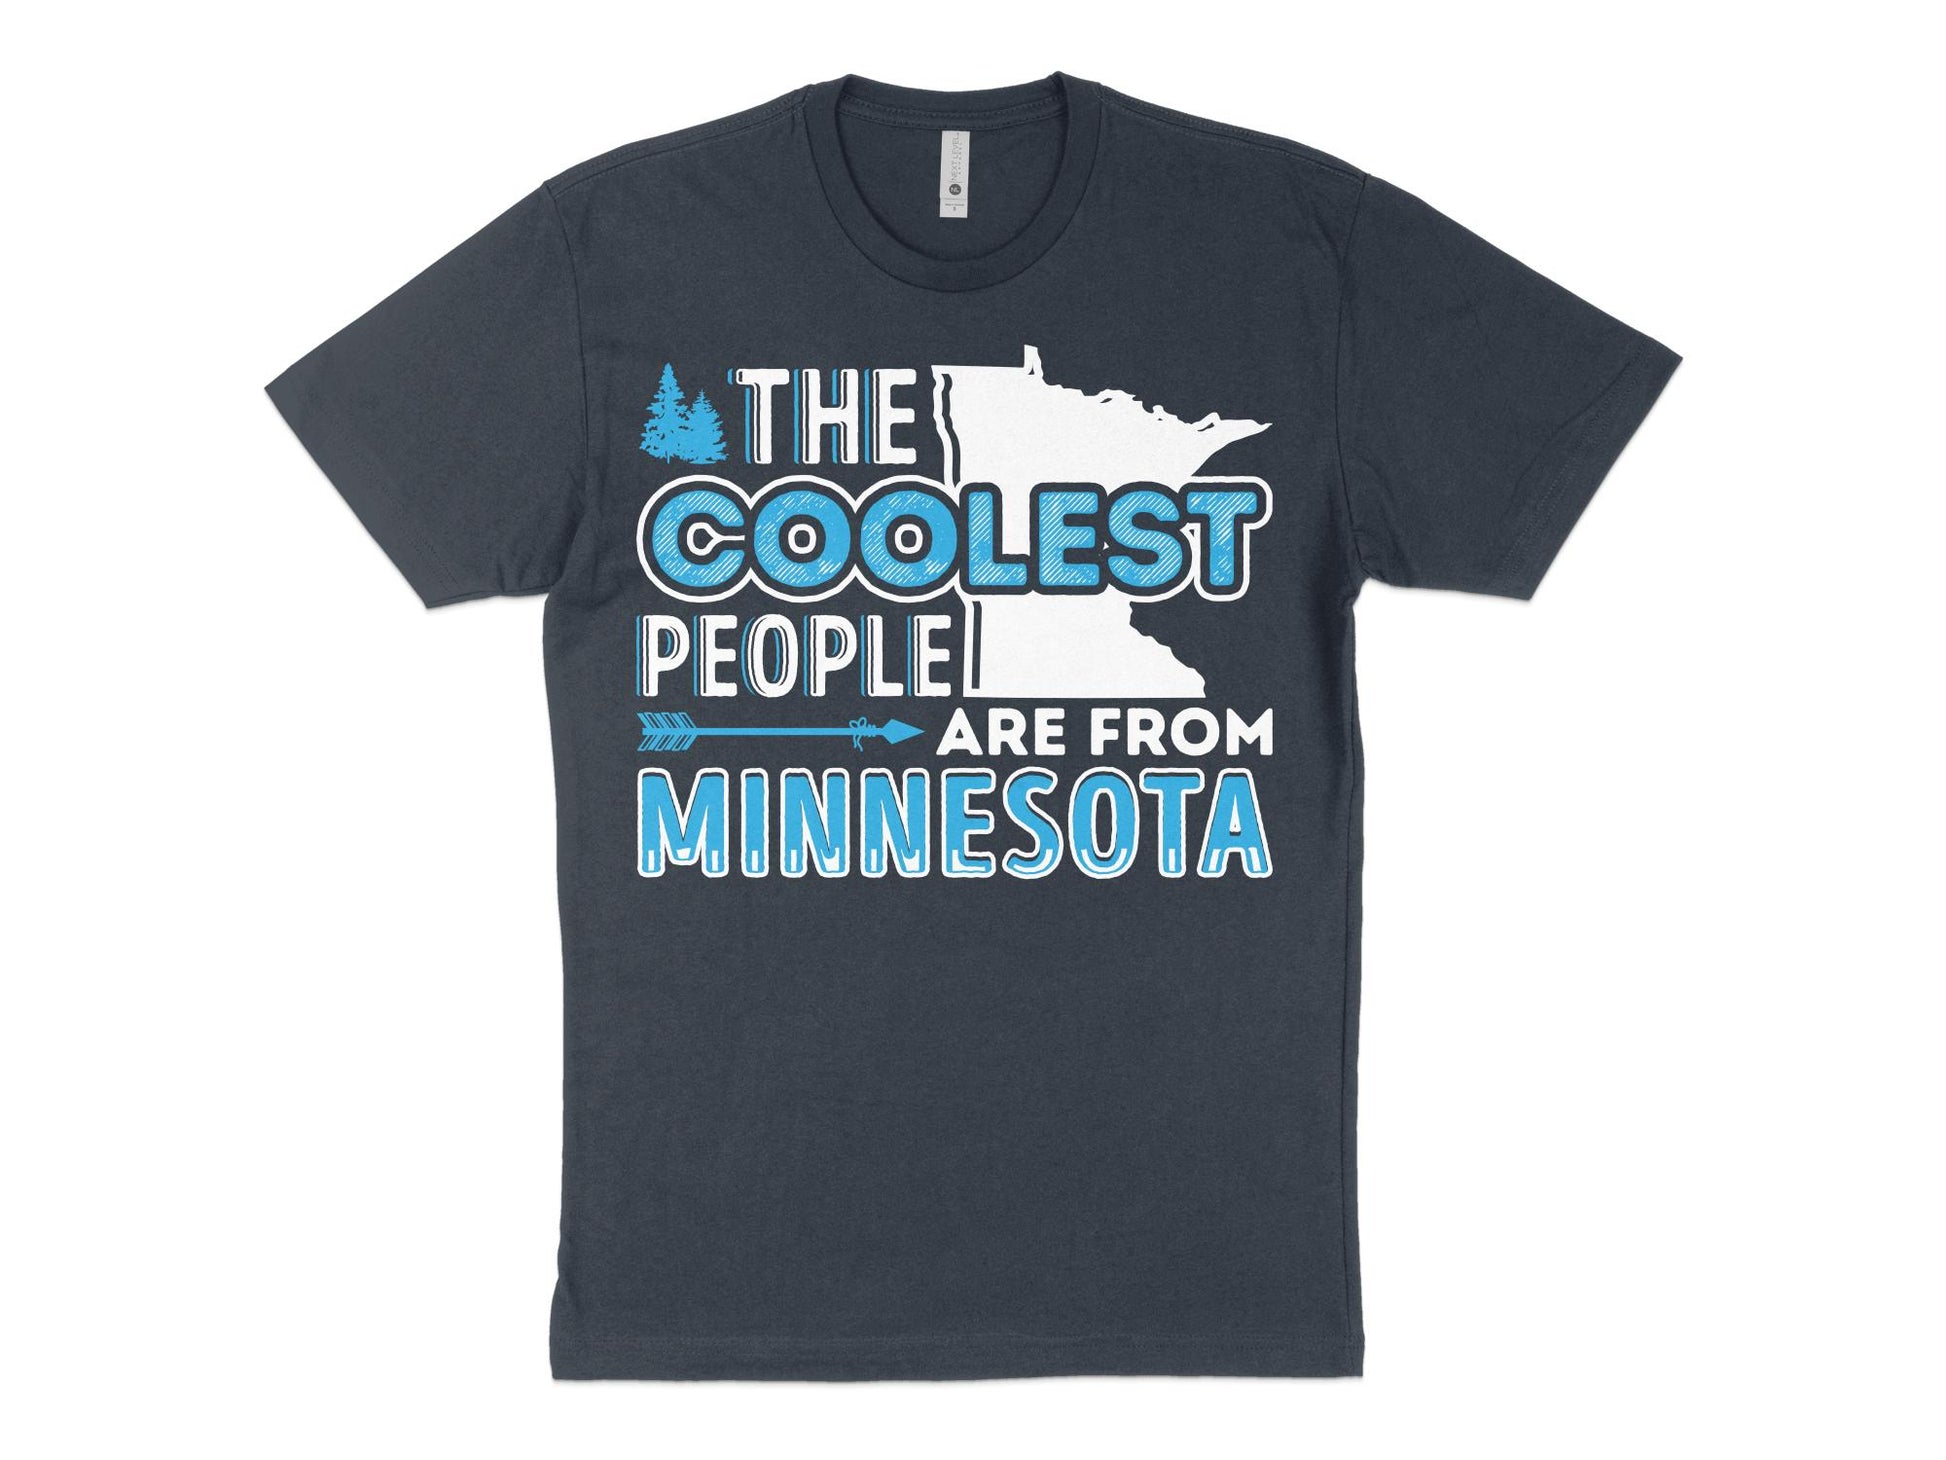 Minnesota T Shirt - The Coolest People Are From Minnesota, blue